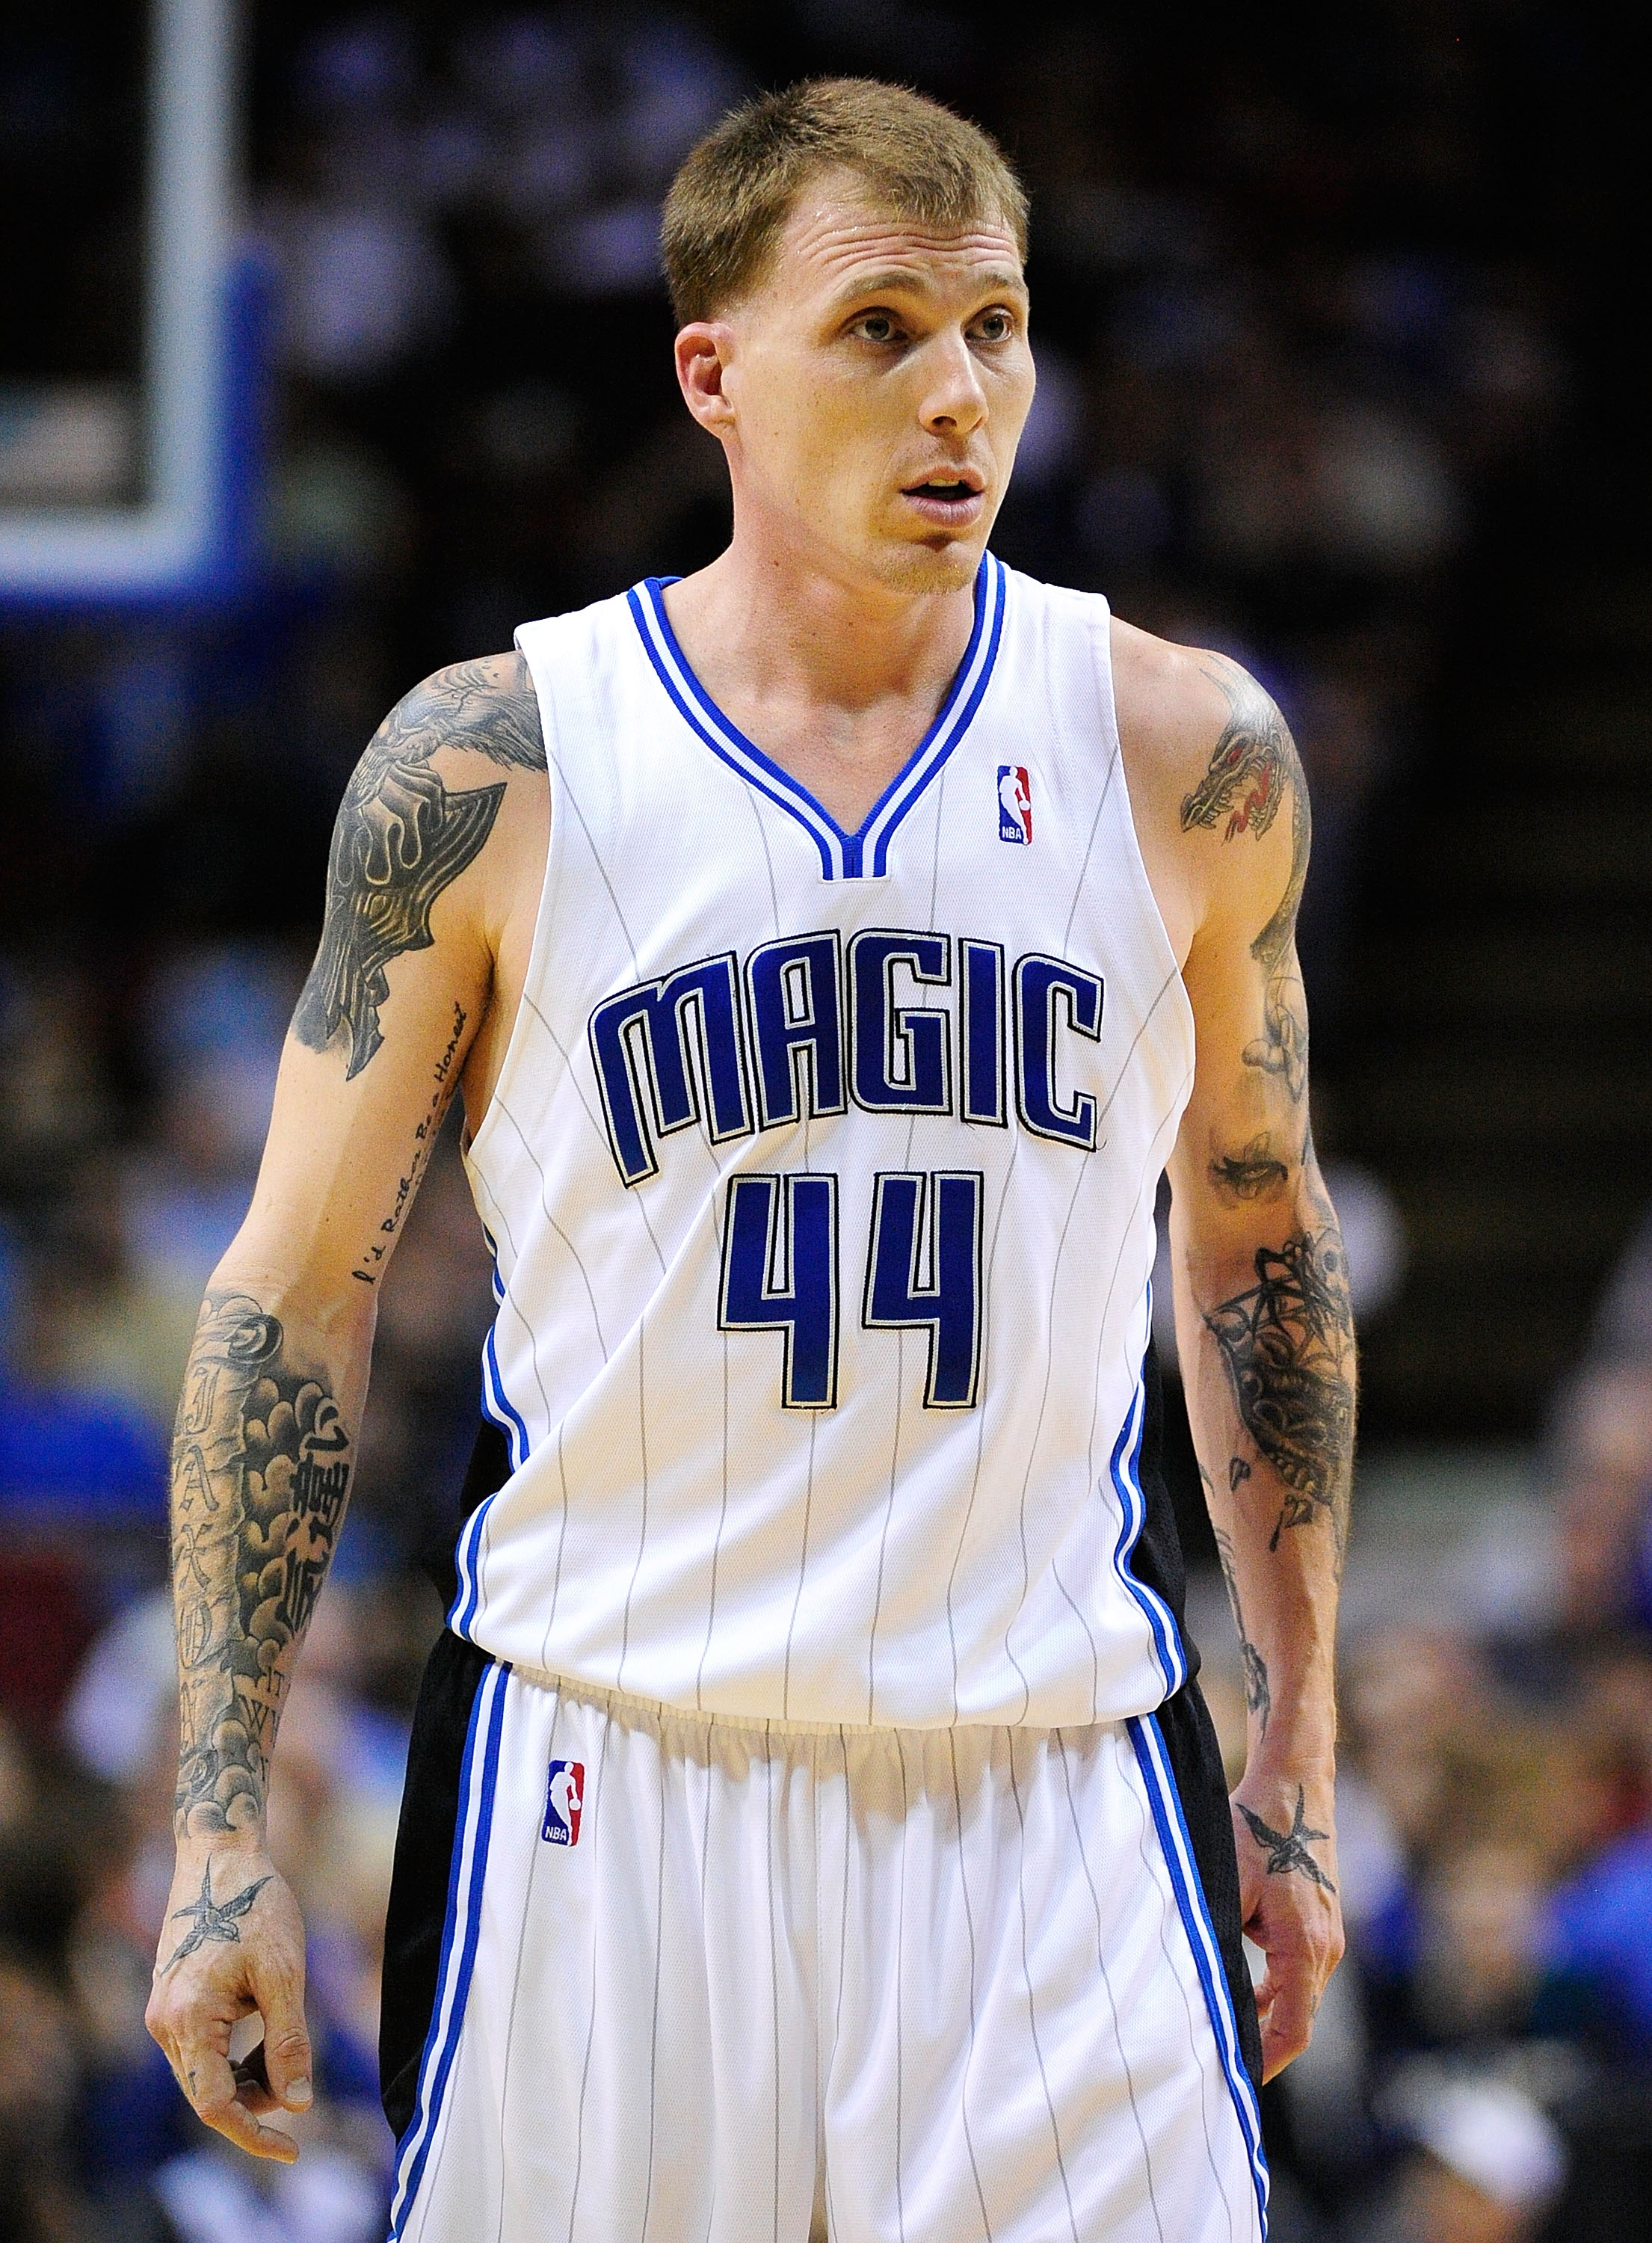 My favorite player: Jason Williams, the one and only 'White Chocolate' -  The Athletic